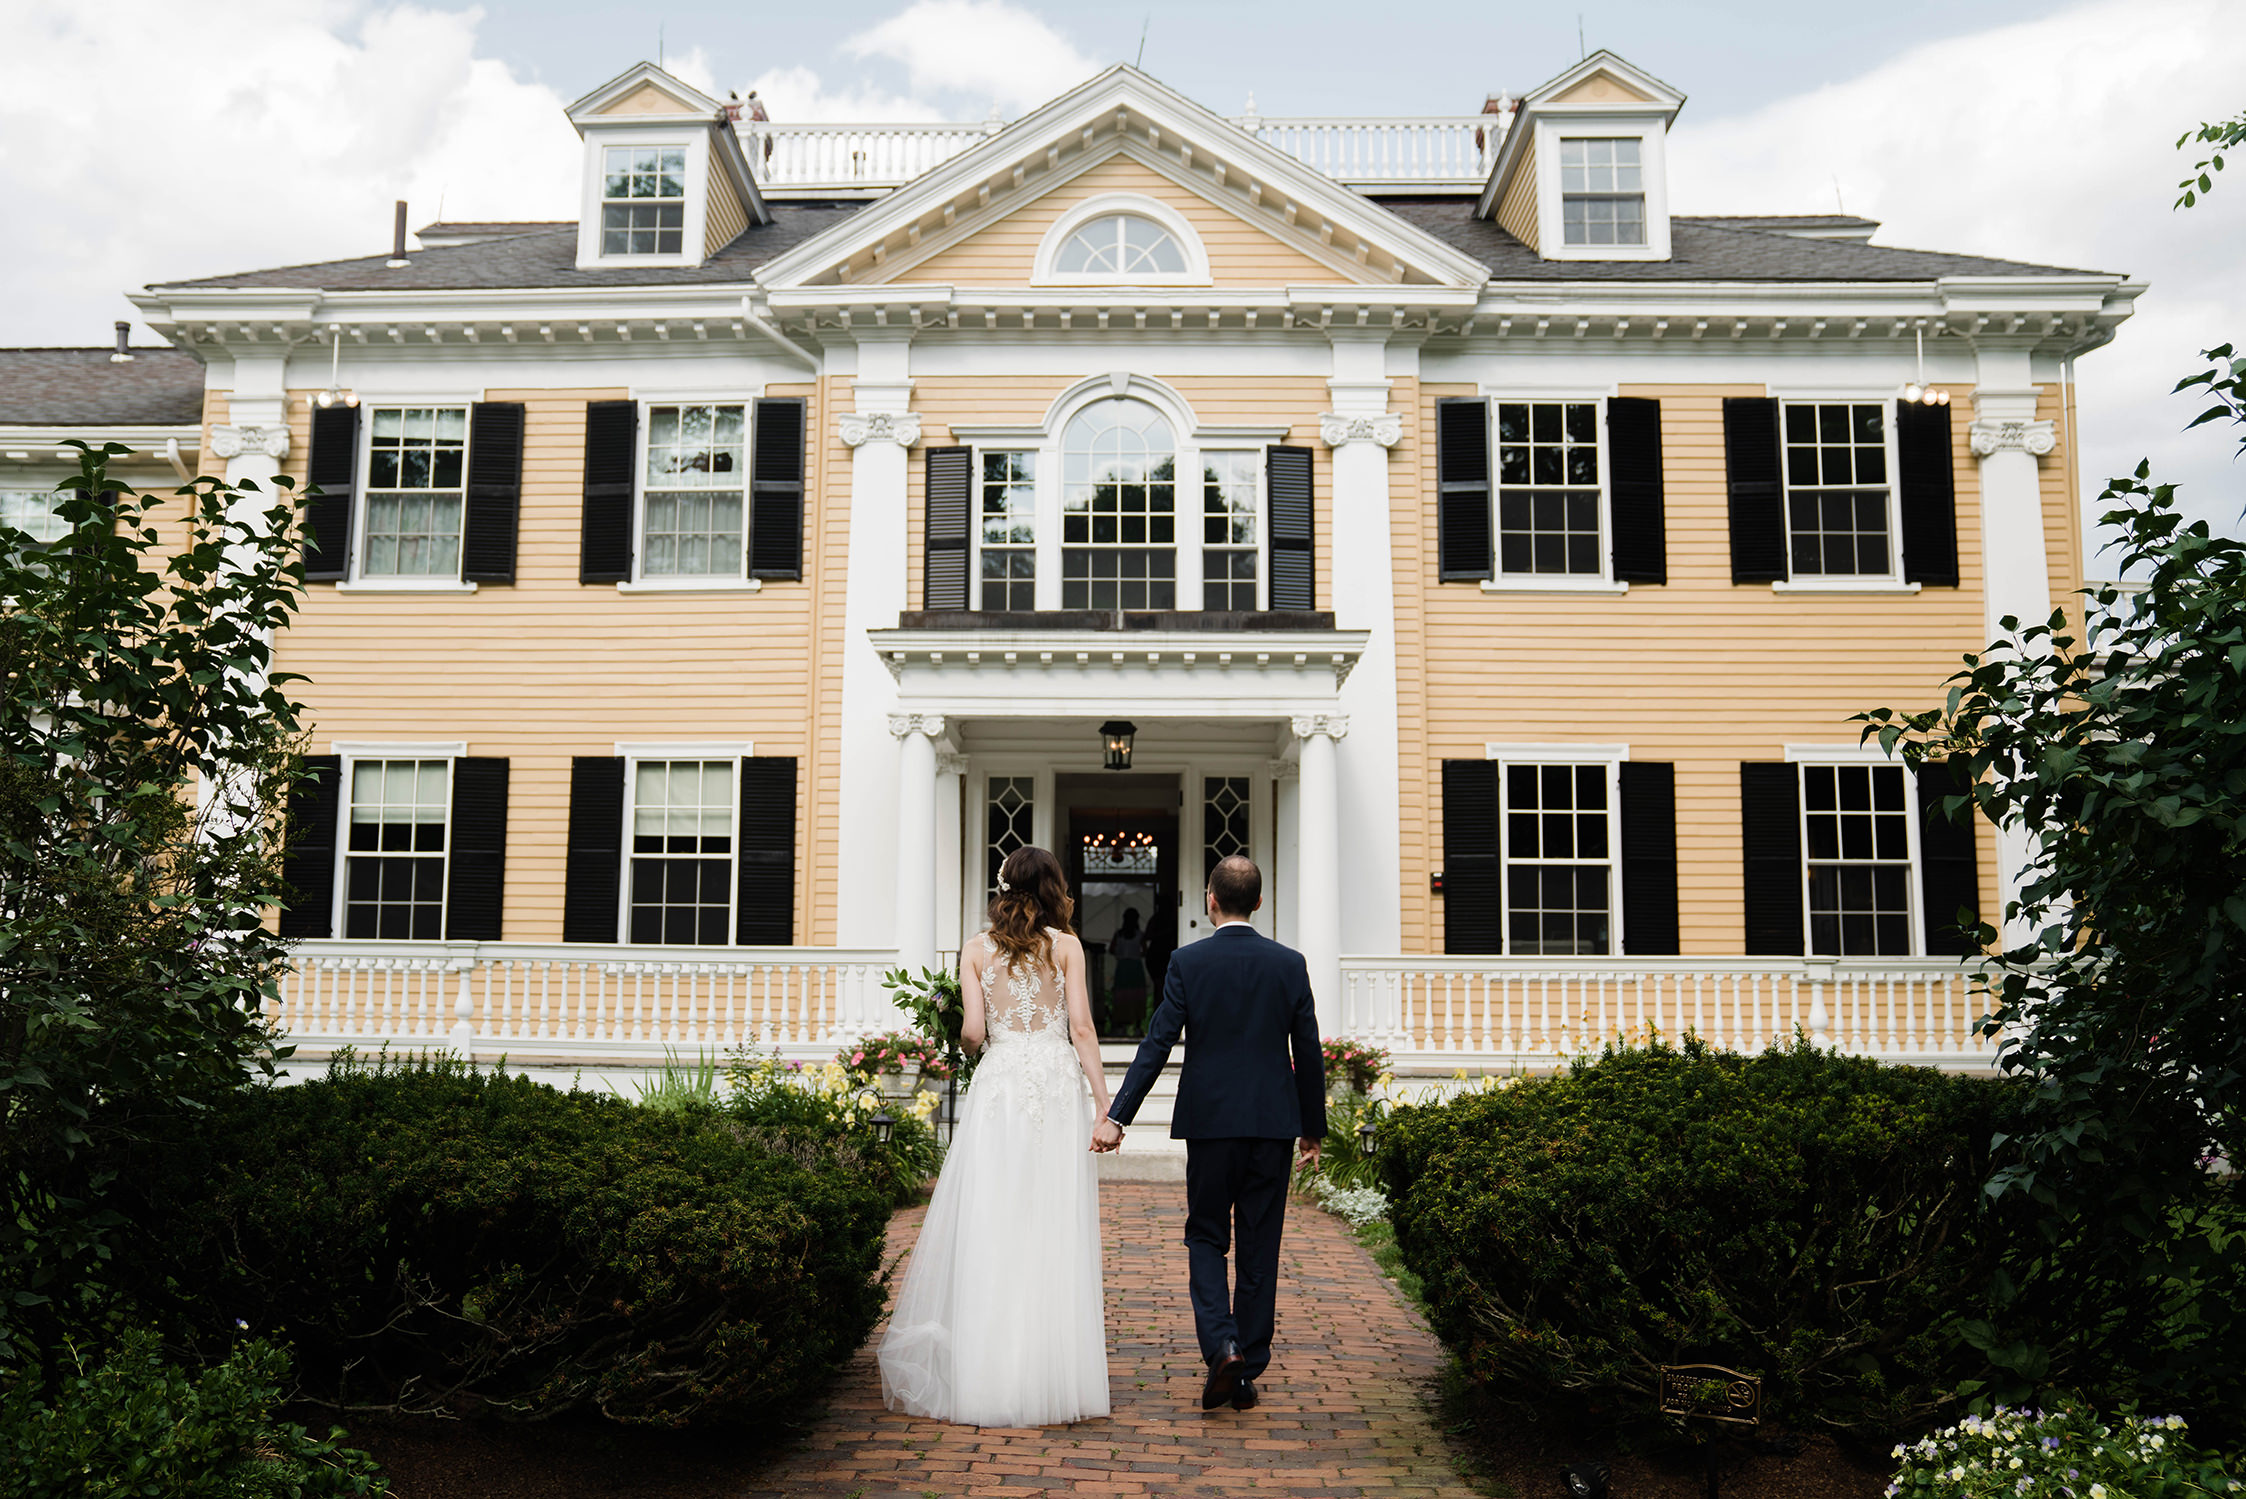 A documentary photograph featured in the best of wedding photography of 2019 showing a couple walking into their wedding reception at Pierce House